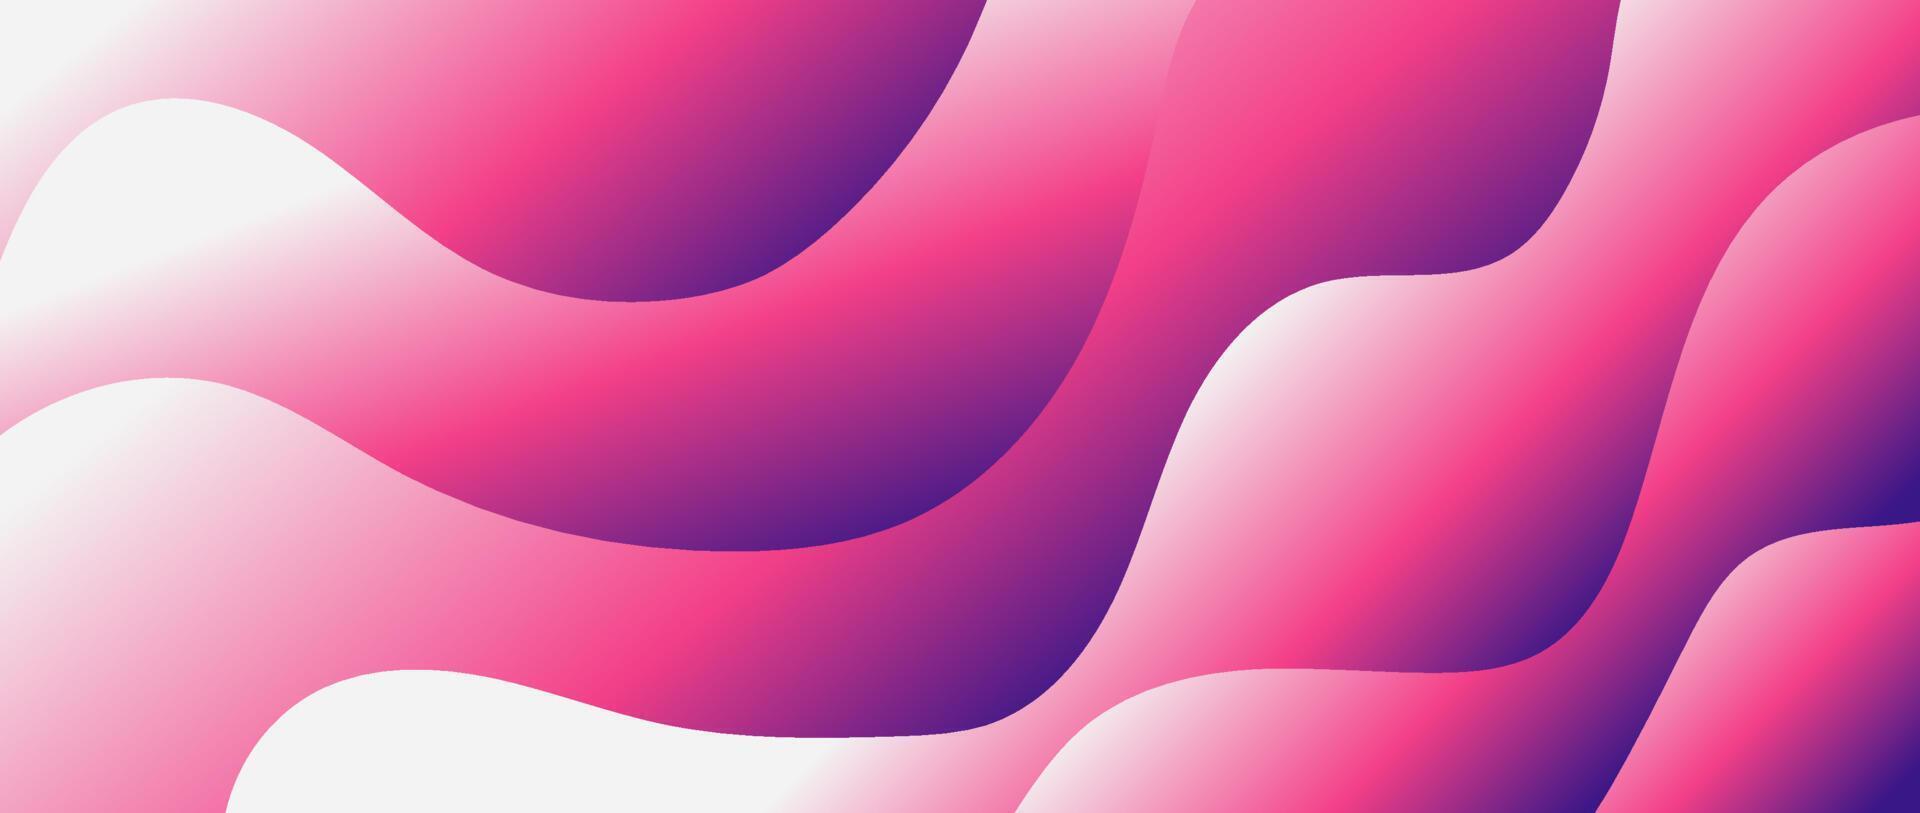 Dynamic wave gradient background vector